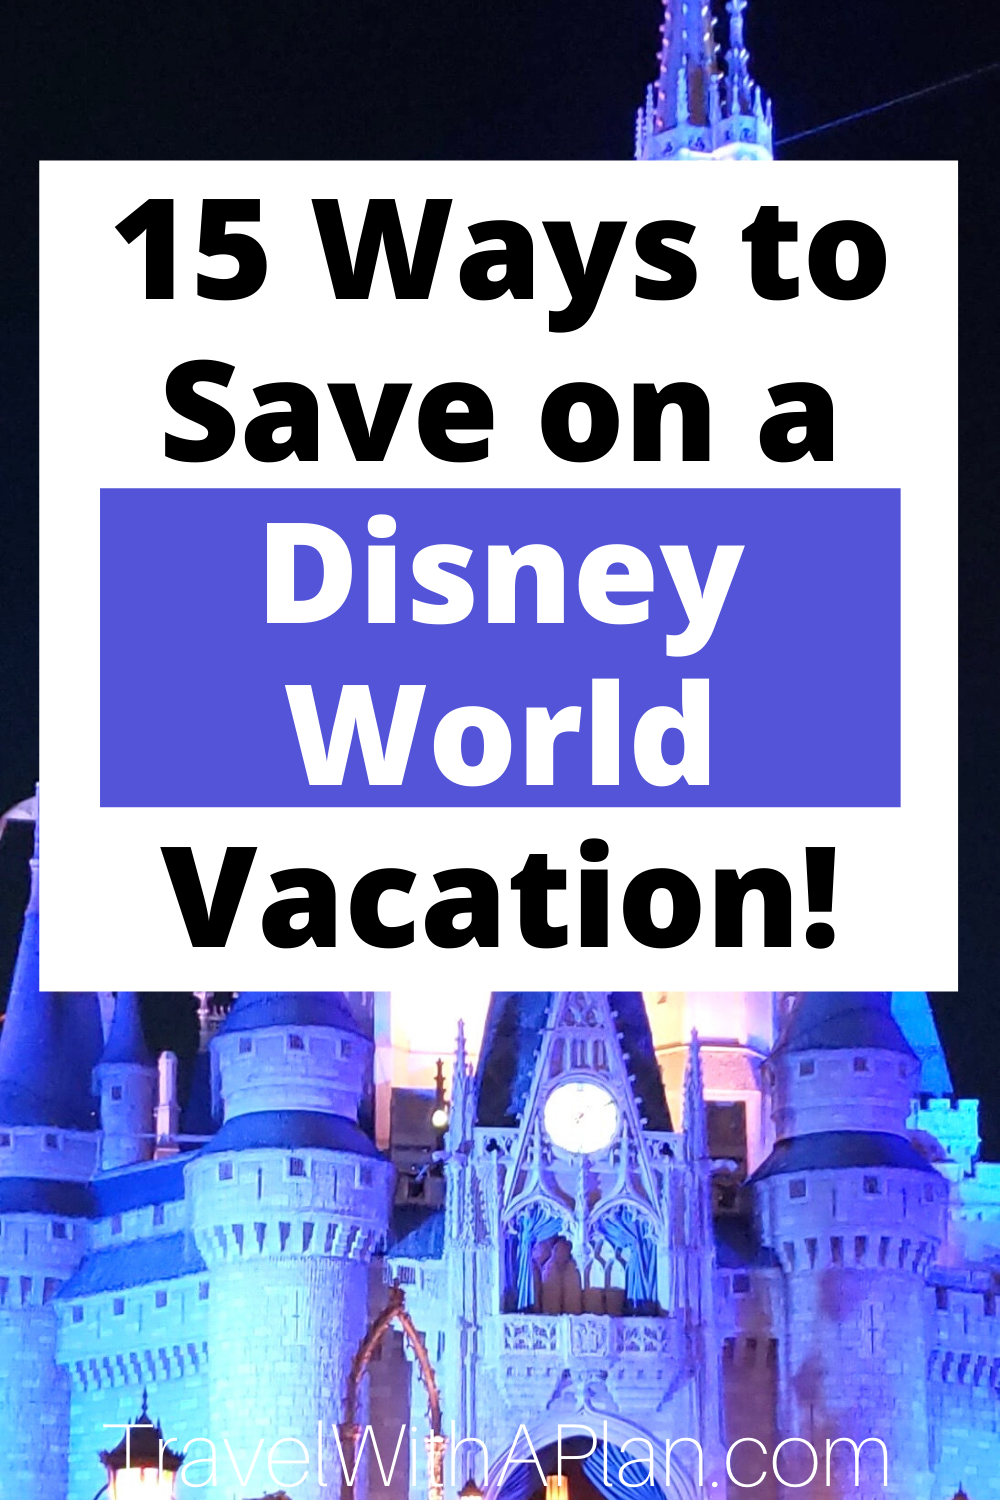 Discover how to save money at Disney World from top US Family Travel Blog, Travel With A Plan!